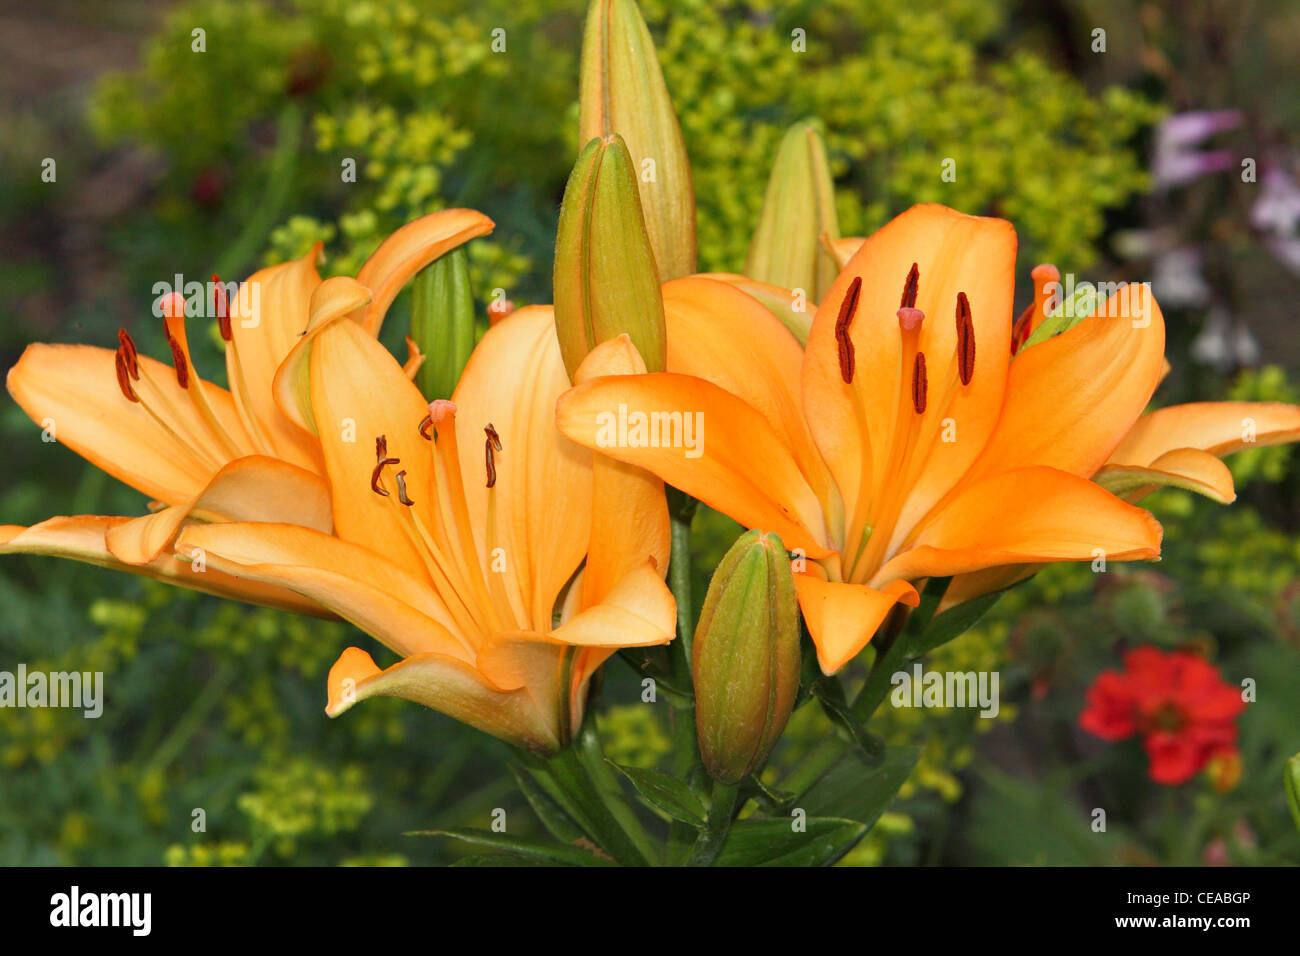 a small bunch of beautiful orange lily flowers Stock Photo